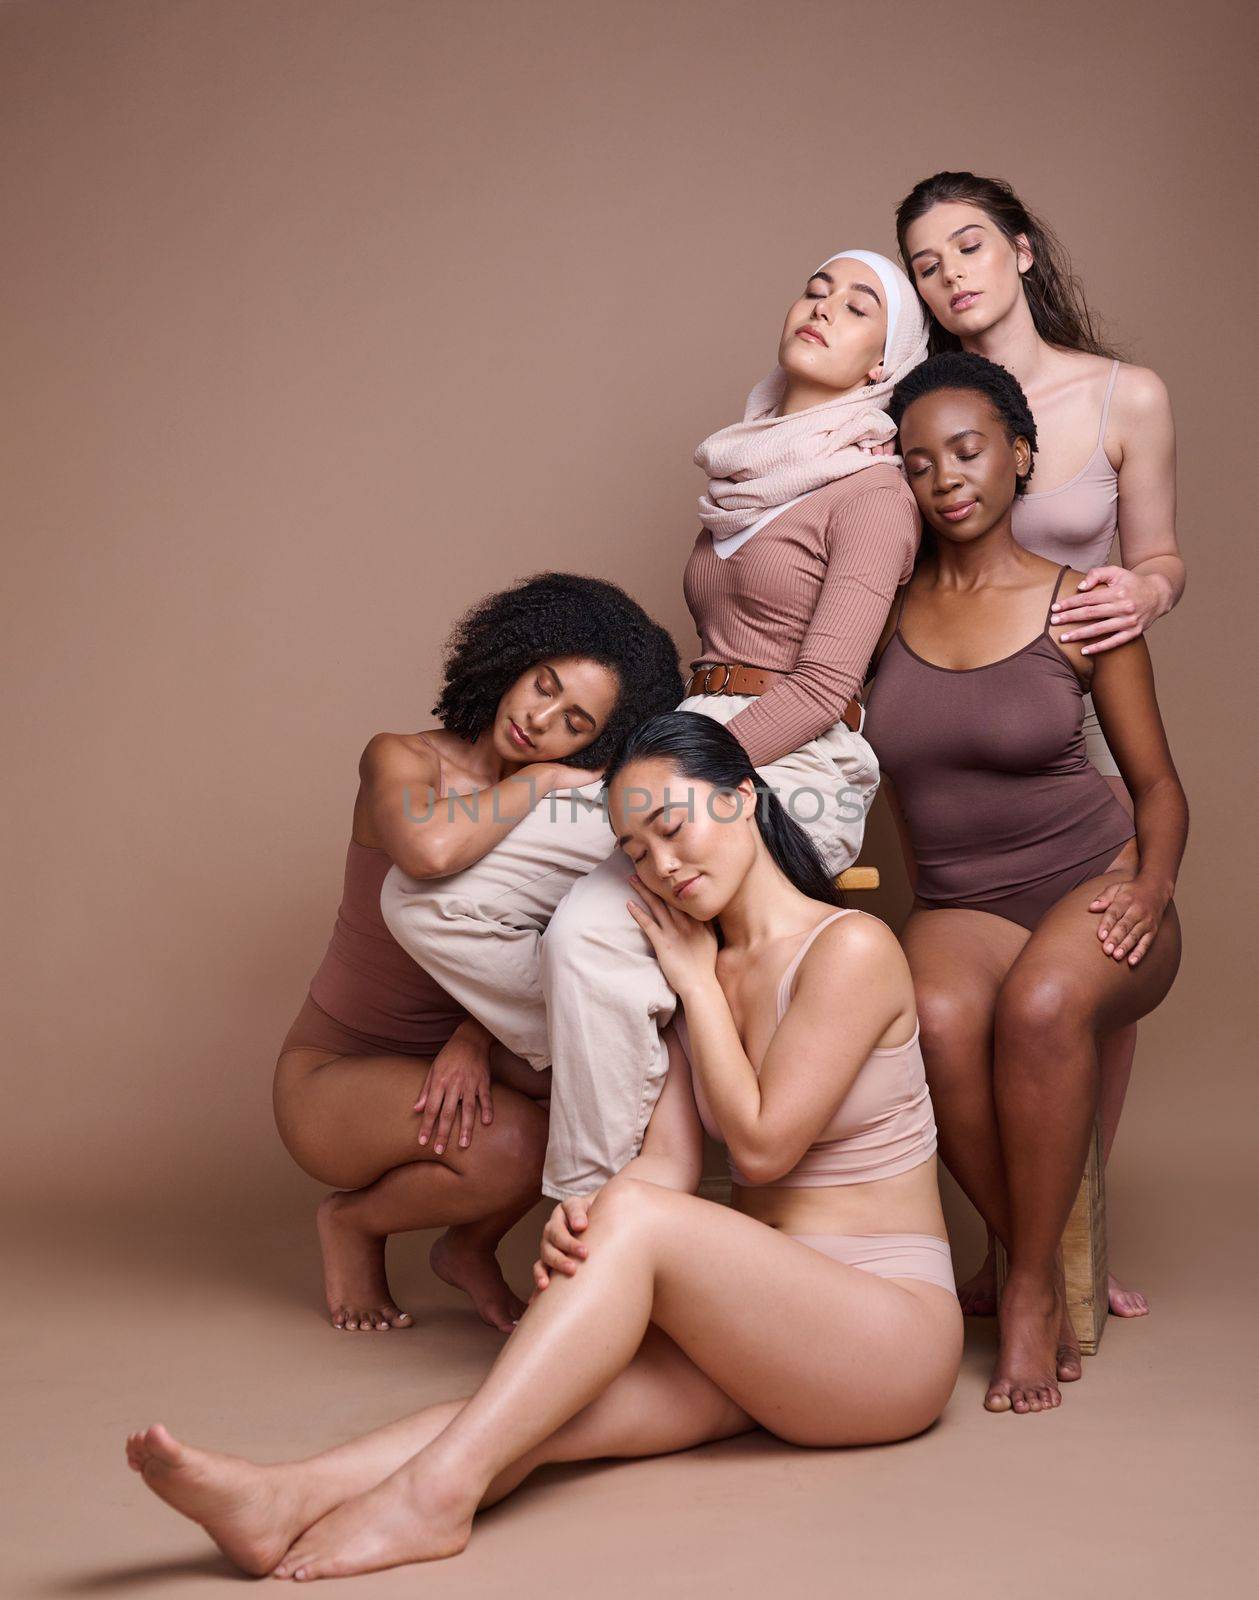 Diversity, woman and body positive skincare beauty for inclusion, spa dermatology wellness and natural body care in studio. Interracial model friends, support and relax cosmetic equality in underwear by YuriArcurs